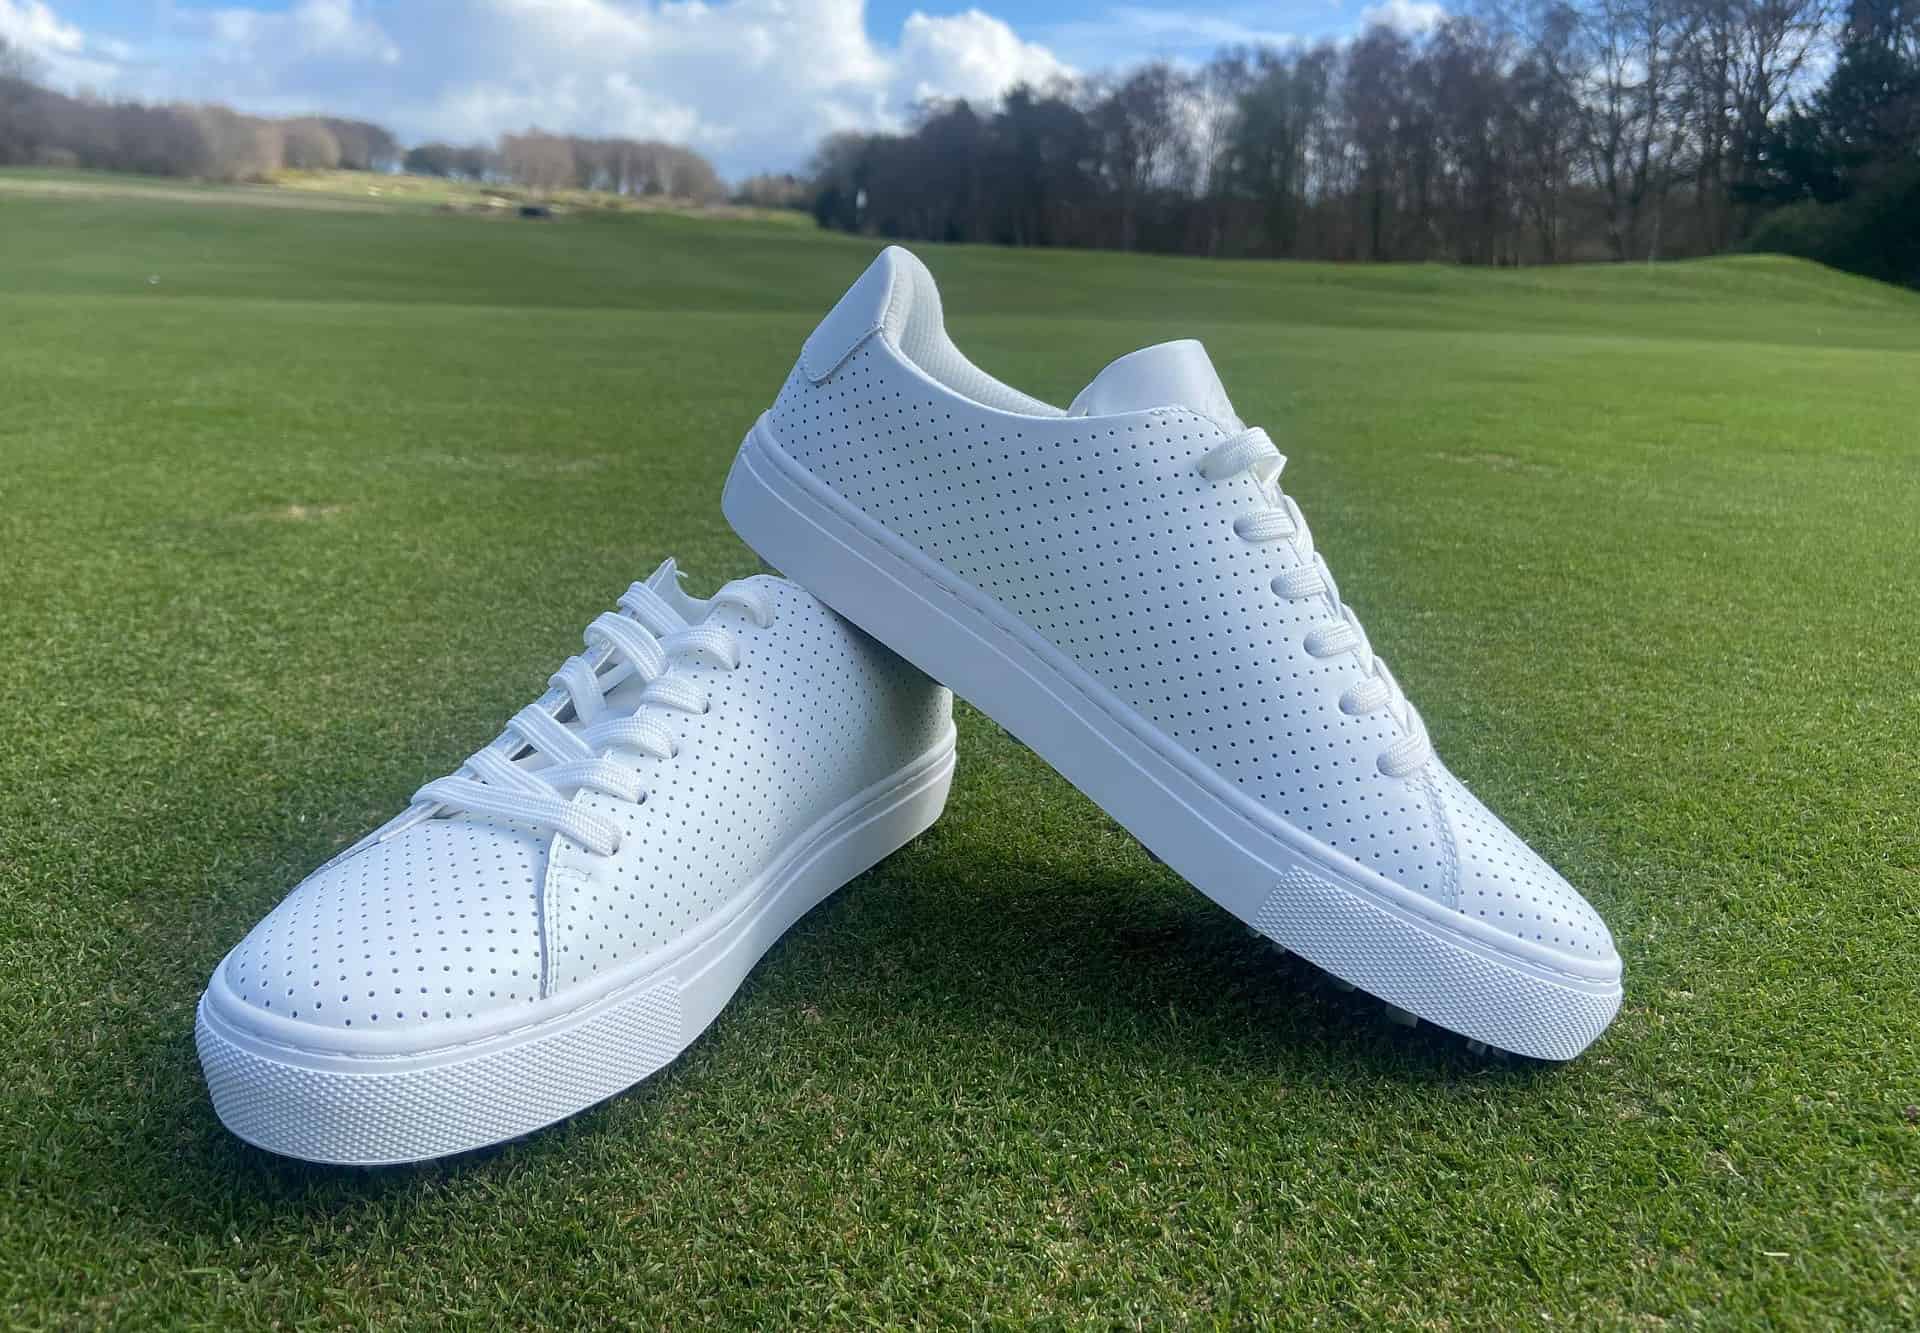 G Fore Women's Perforated Durf golf shoes review